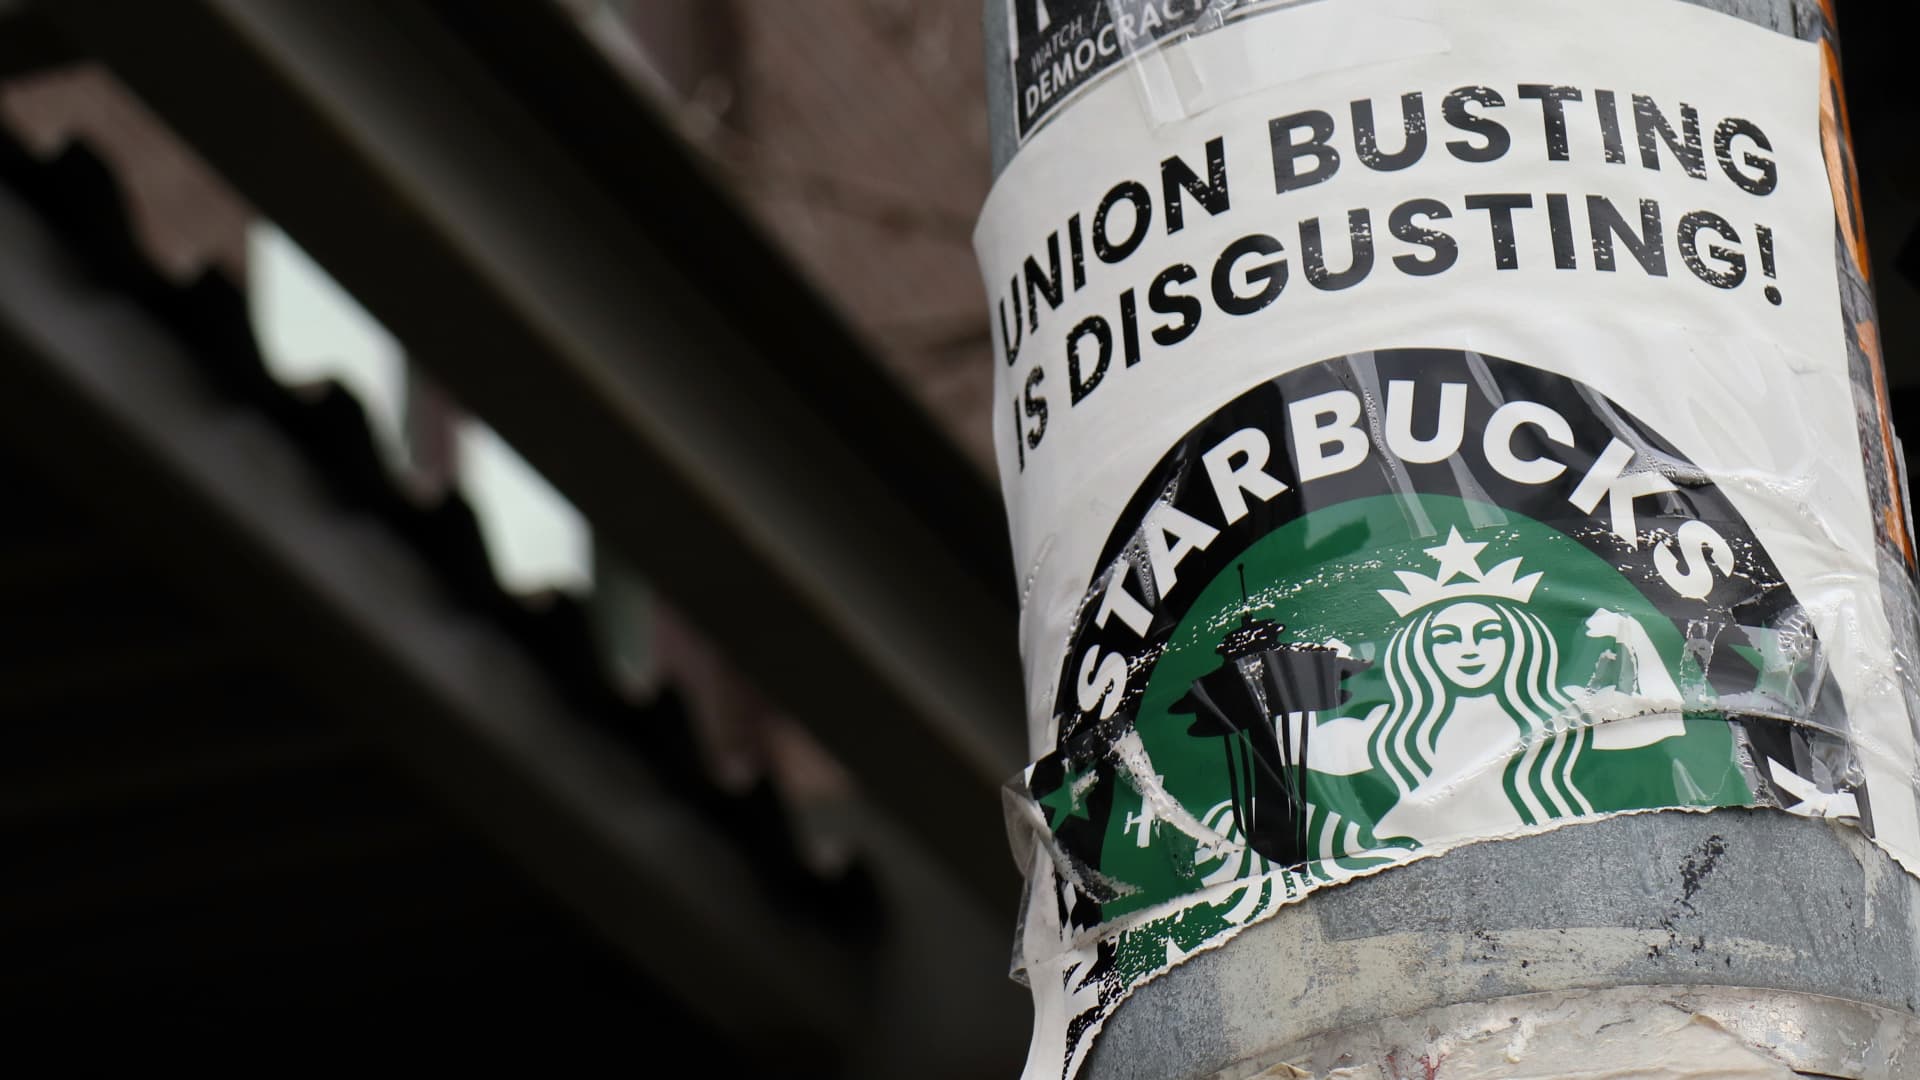 Union claims Starbucks illegally closing cafe to retaliate, Bloomberg reports